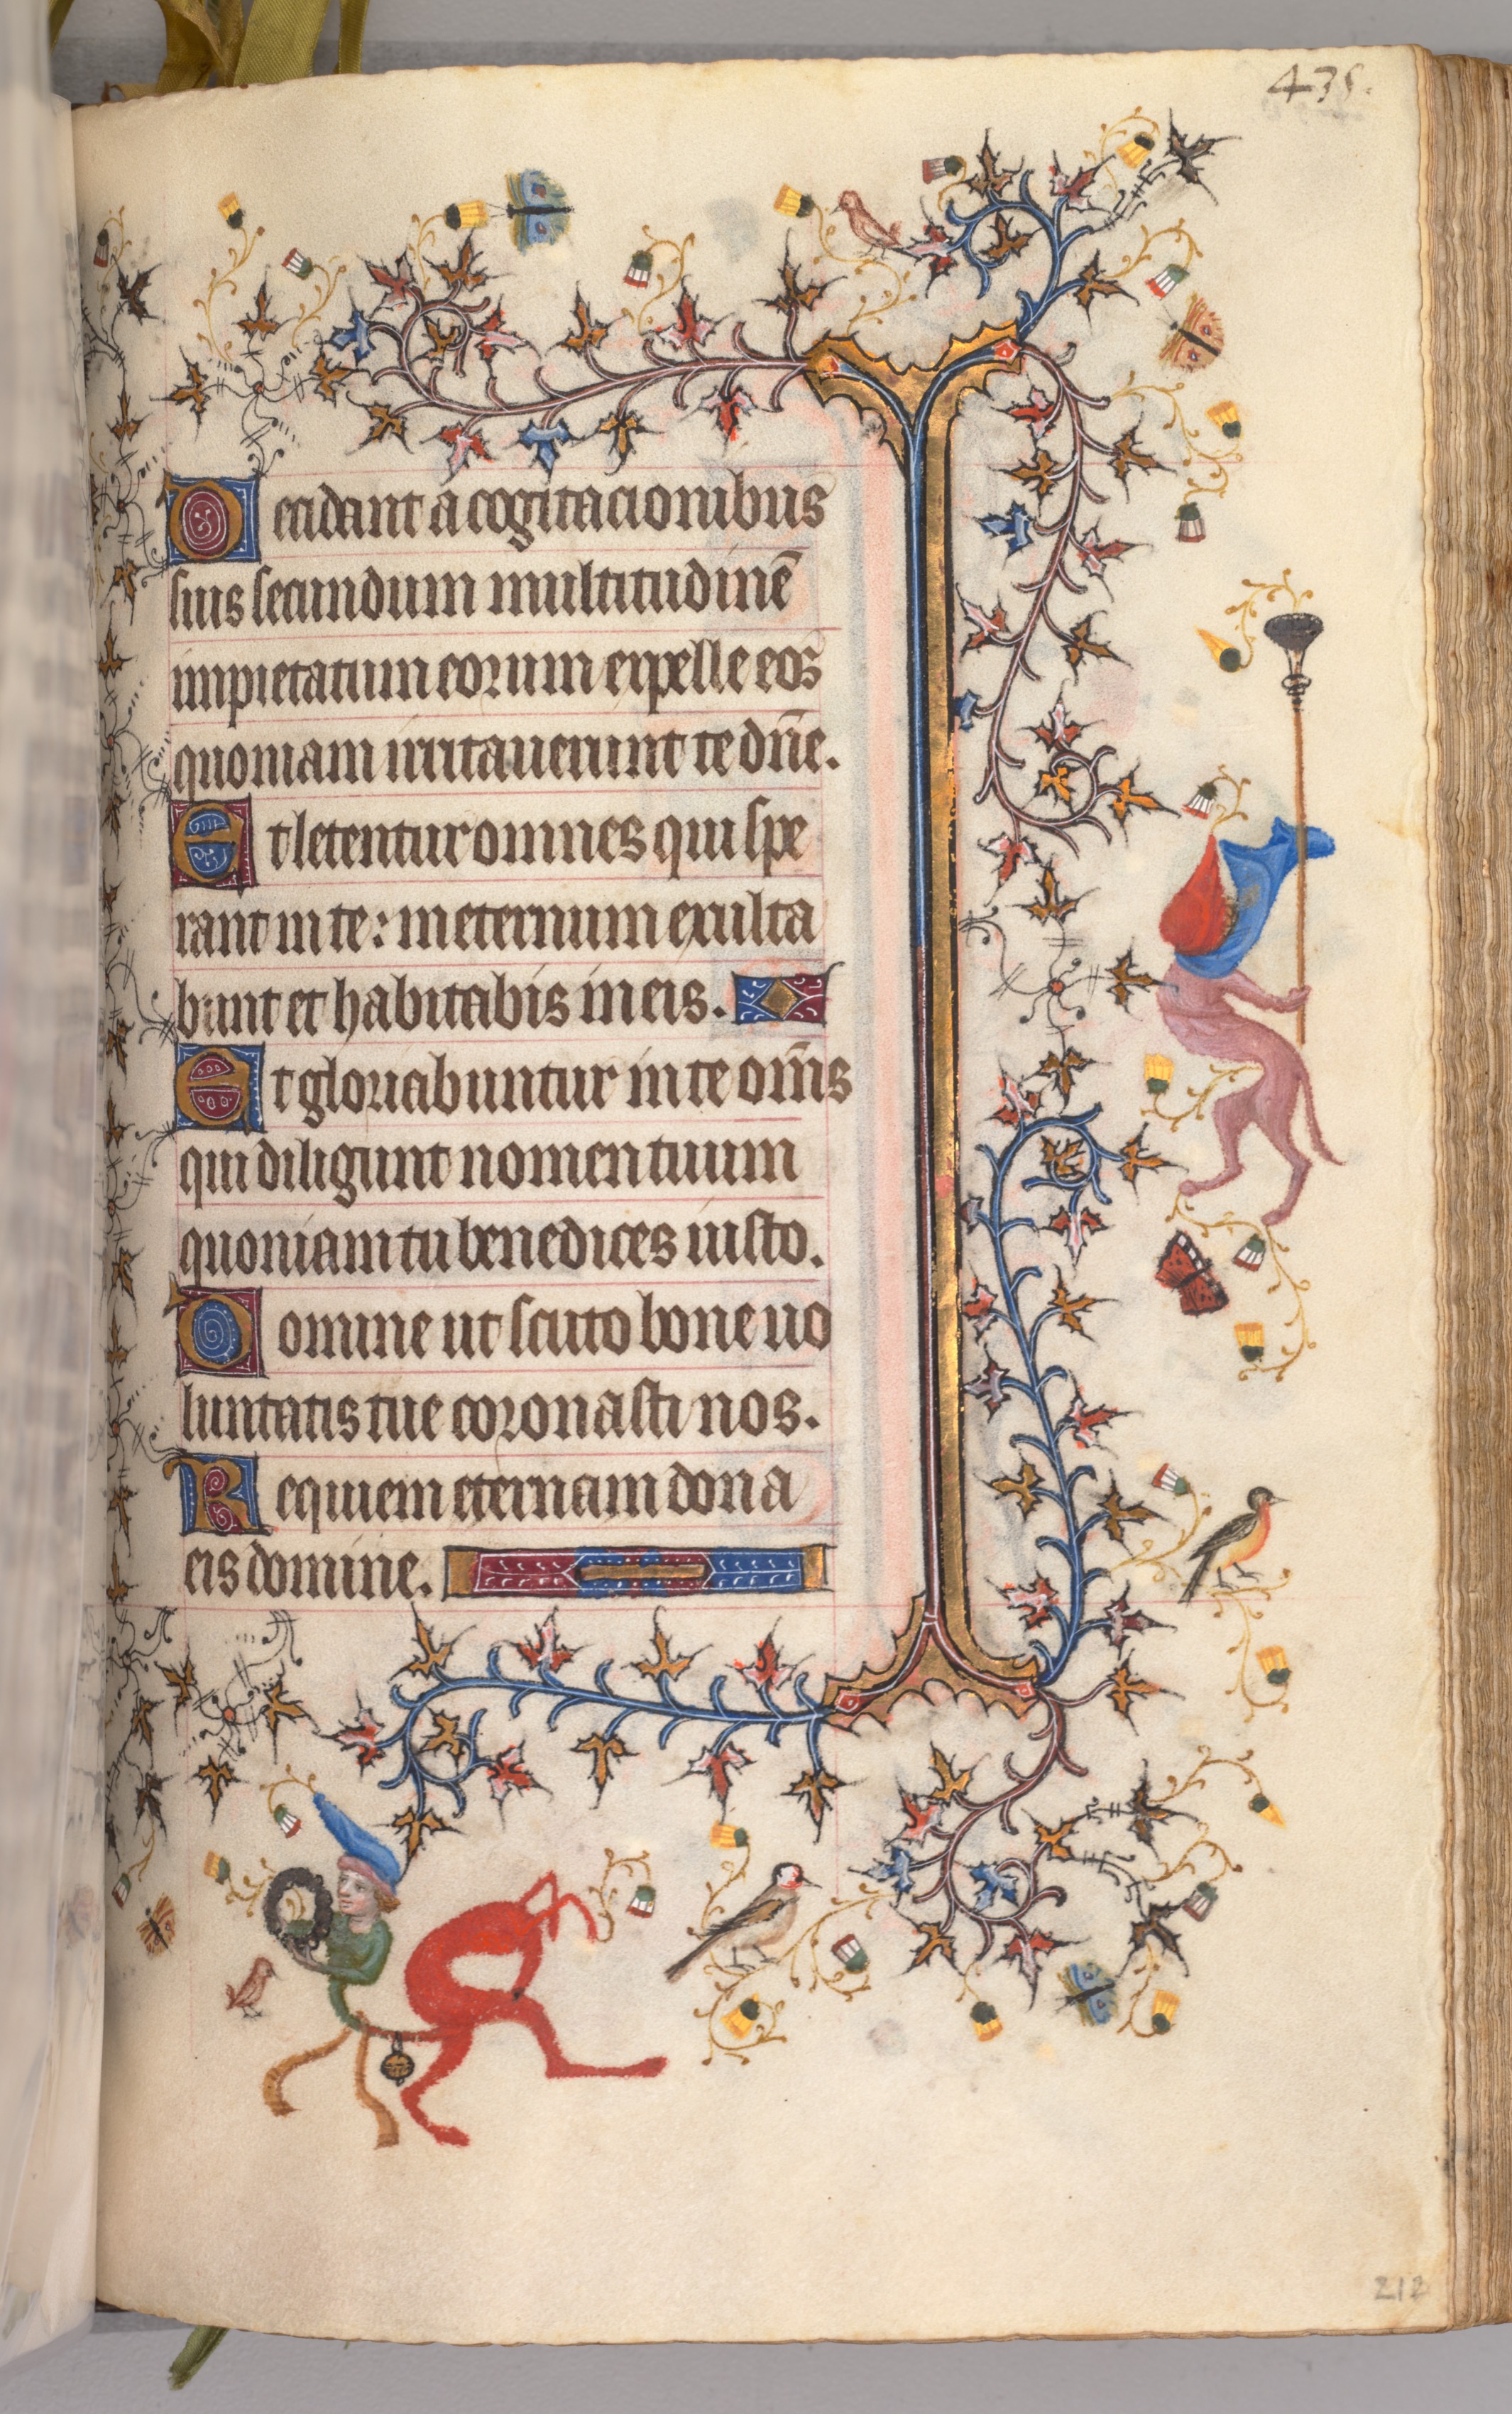 Hours of Charles the Noble, King of Navarre (1361-1425): fol. 212r, Text